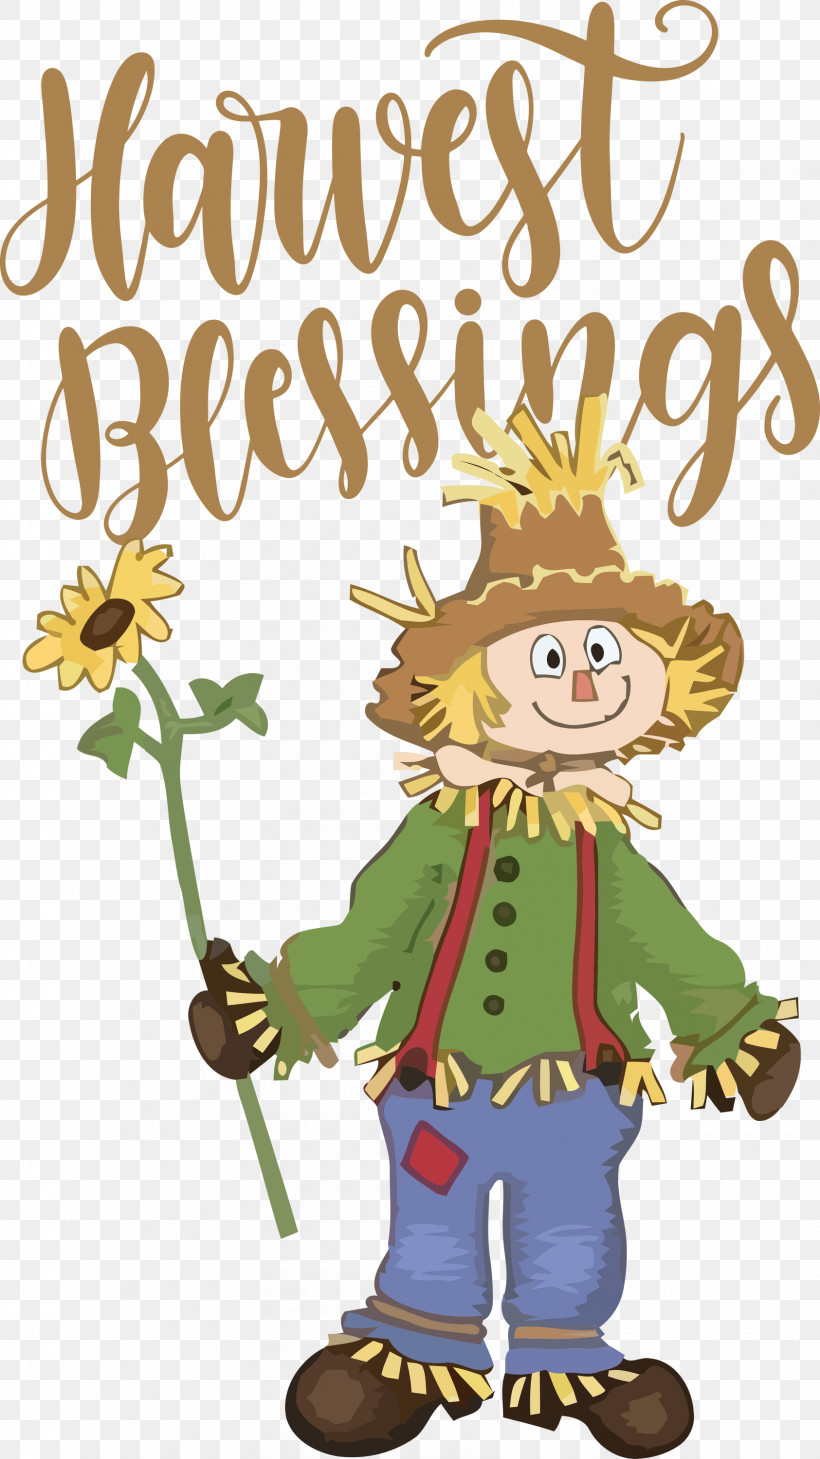 Harvest Blessings Thanksgiving Autumn, PNG, 1685x3000px, Harvest Blessings, Autumn, Cartoon, Christmas Day, Harvest Download Free